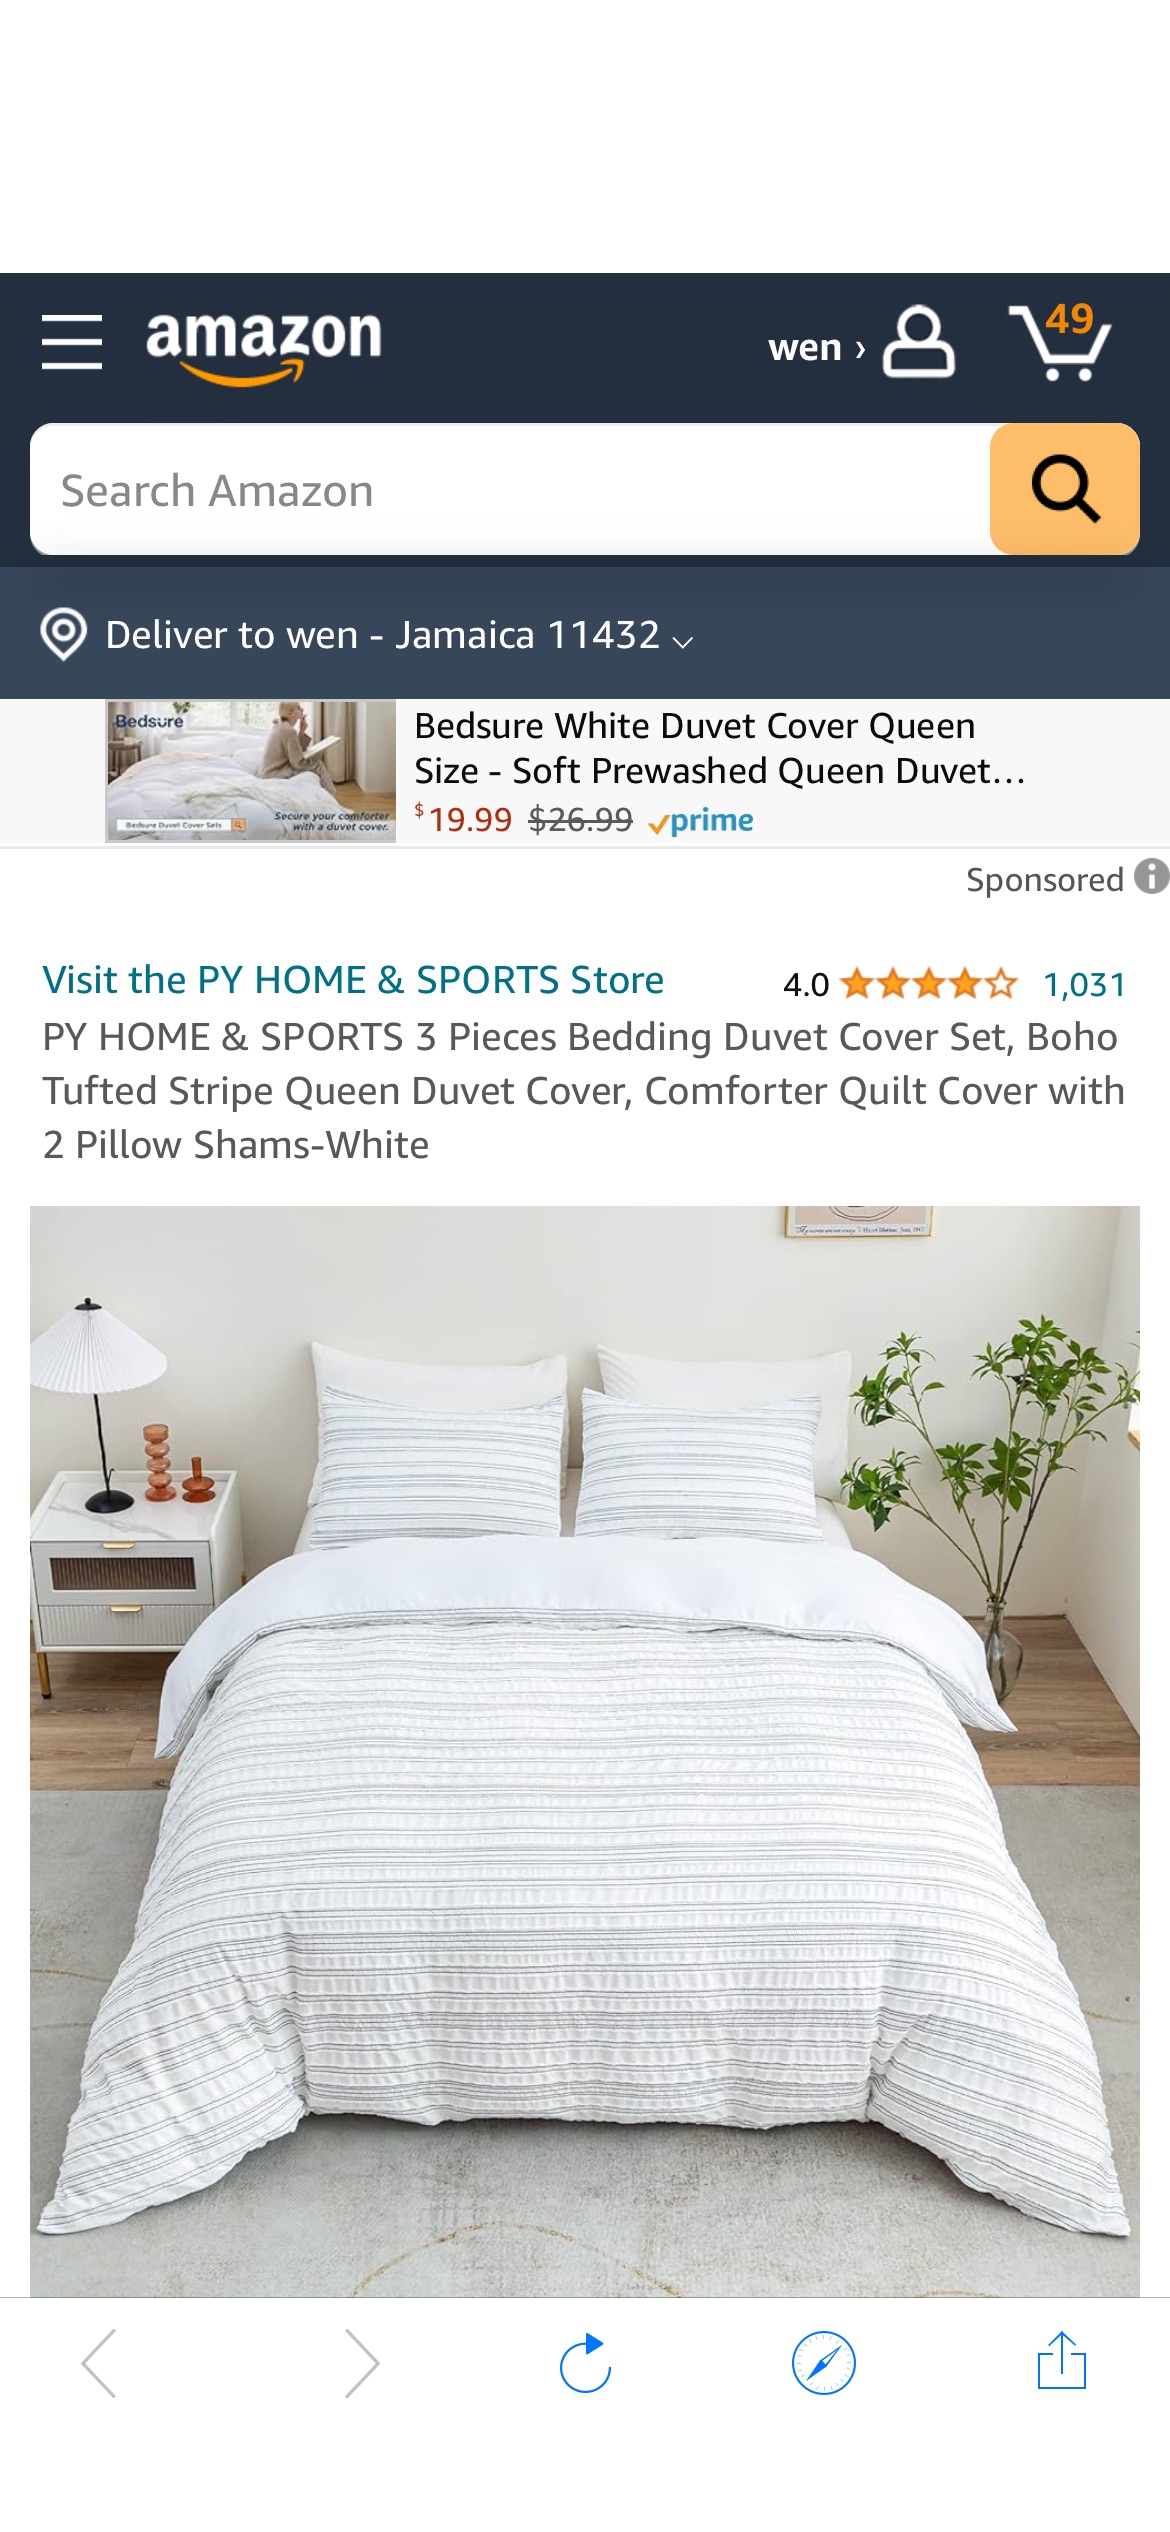 Amazon.com: PY HOME & SPORTS 3 Pieces Bedding Duvet Cover Set, Boho Tufted Stripe Queen Duvet Cover, Comforter Quilt Cover with 2 Pillow Shams-White : Home & Kitchen